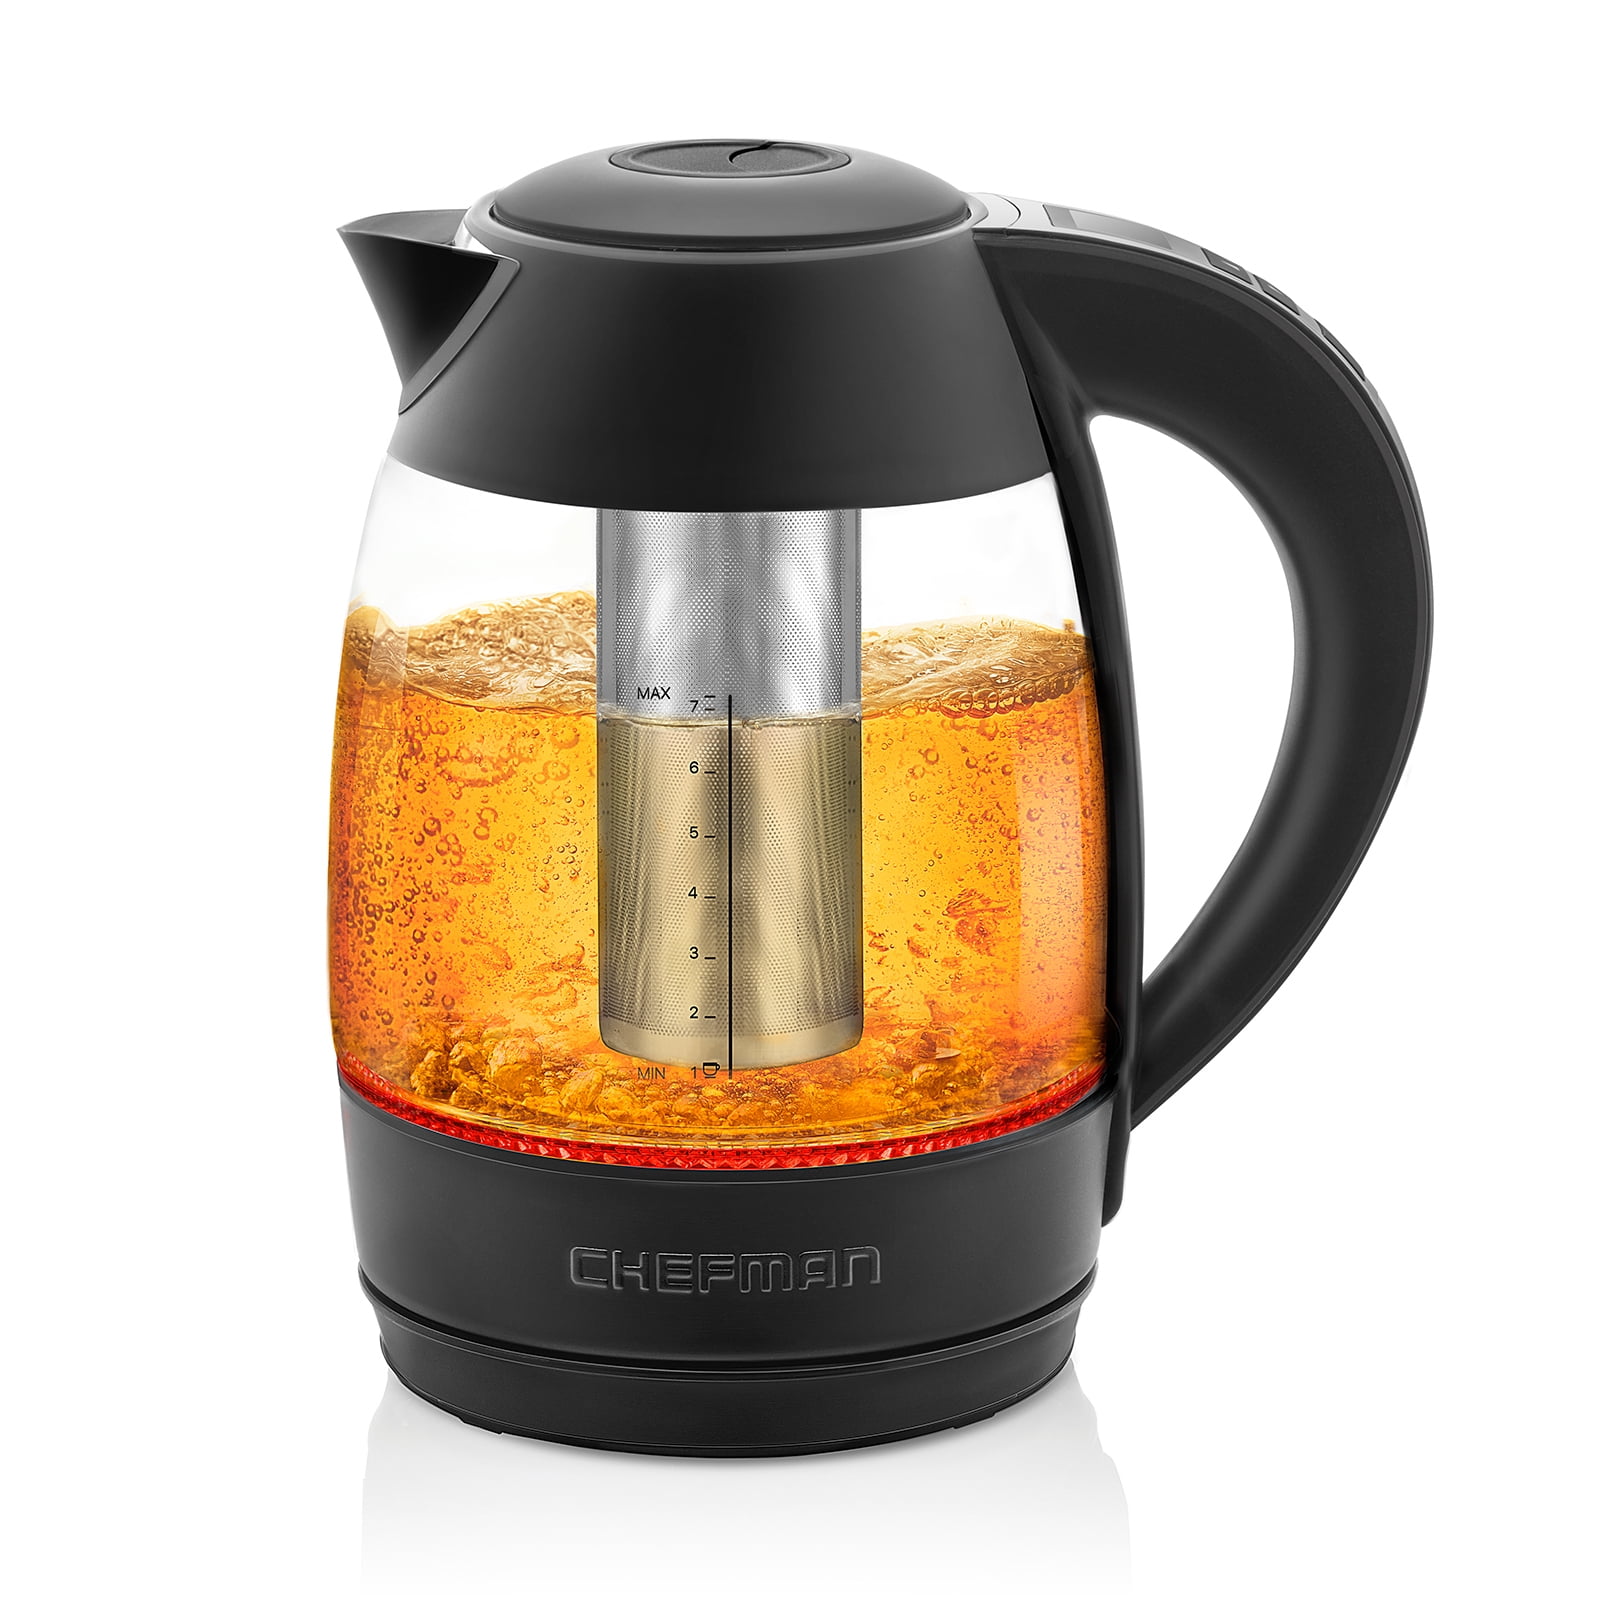  Chefman Electric Kettle with Temperature Control, 5 Presets LED  Indicator Lights, Removable Tea Infuser, Glass Tea Kettle & Hot Water Boiler,  360° Swivel Base, BPA Free, Stainless Steel, 1.8 Liters: Home